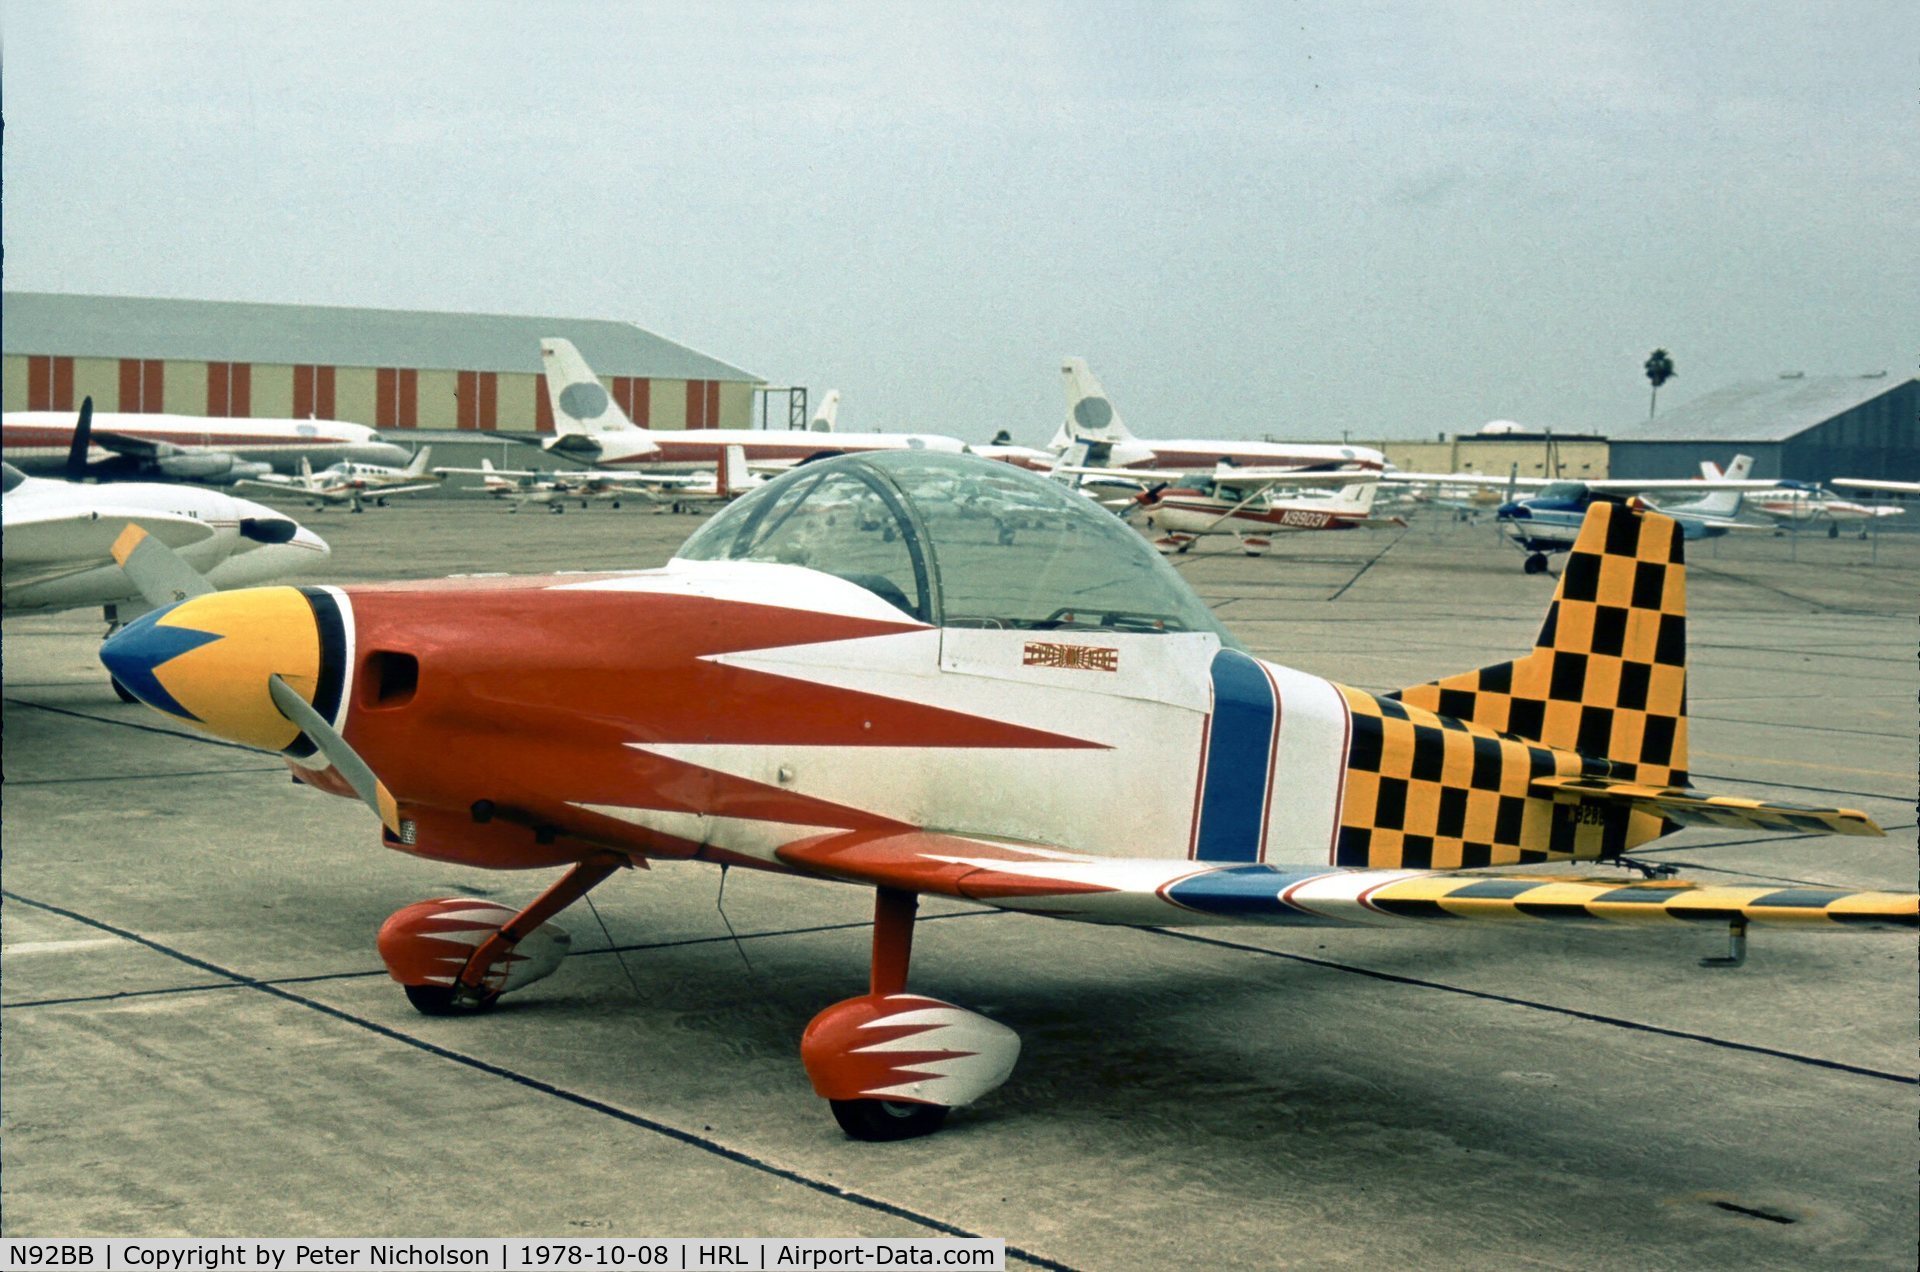 N92BB, 1976 Bushby Mustang II C/N 402, This was a visitor to the 1978 Confederate Air Force Airshow.